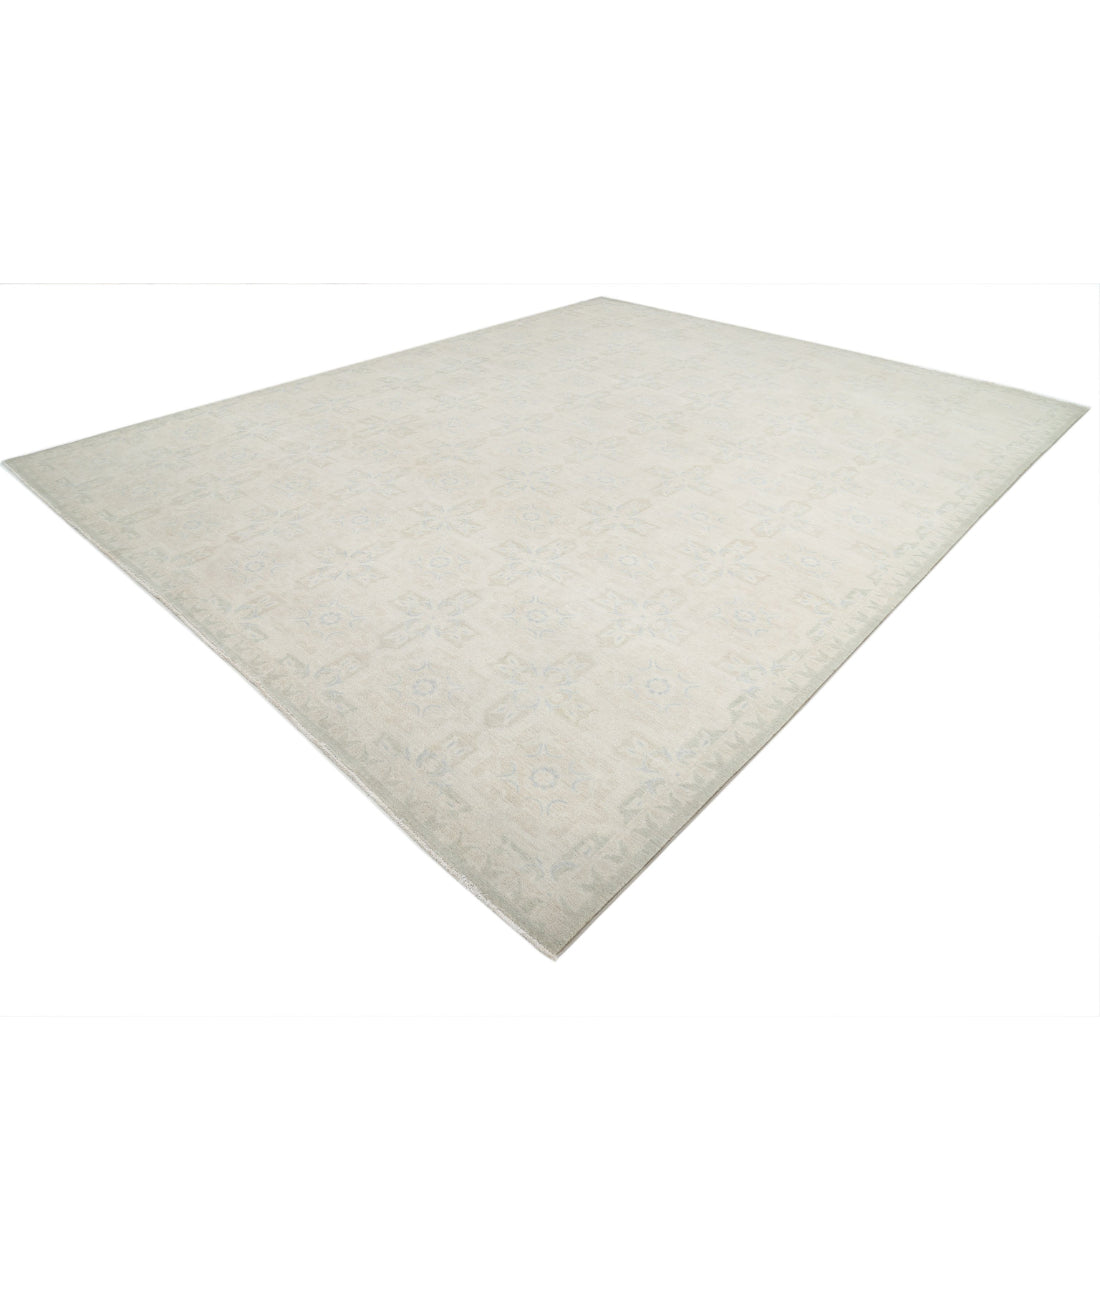 Hand Knotted Serenity Wool Rug - 12'2'' x 14'10'' 12'2'' x 14'10'' (365 X 445) / Ivory / Green